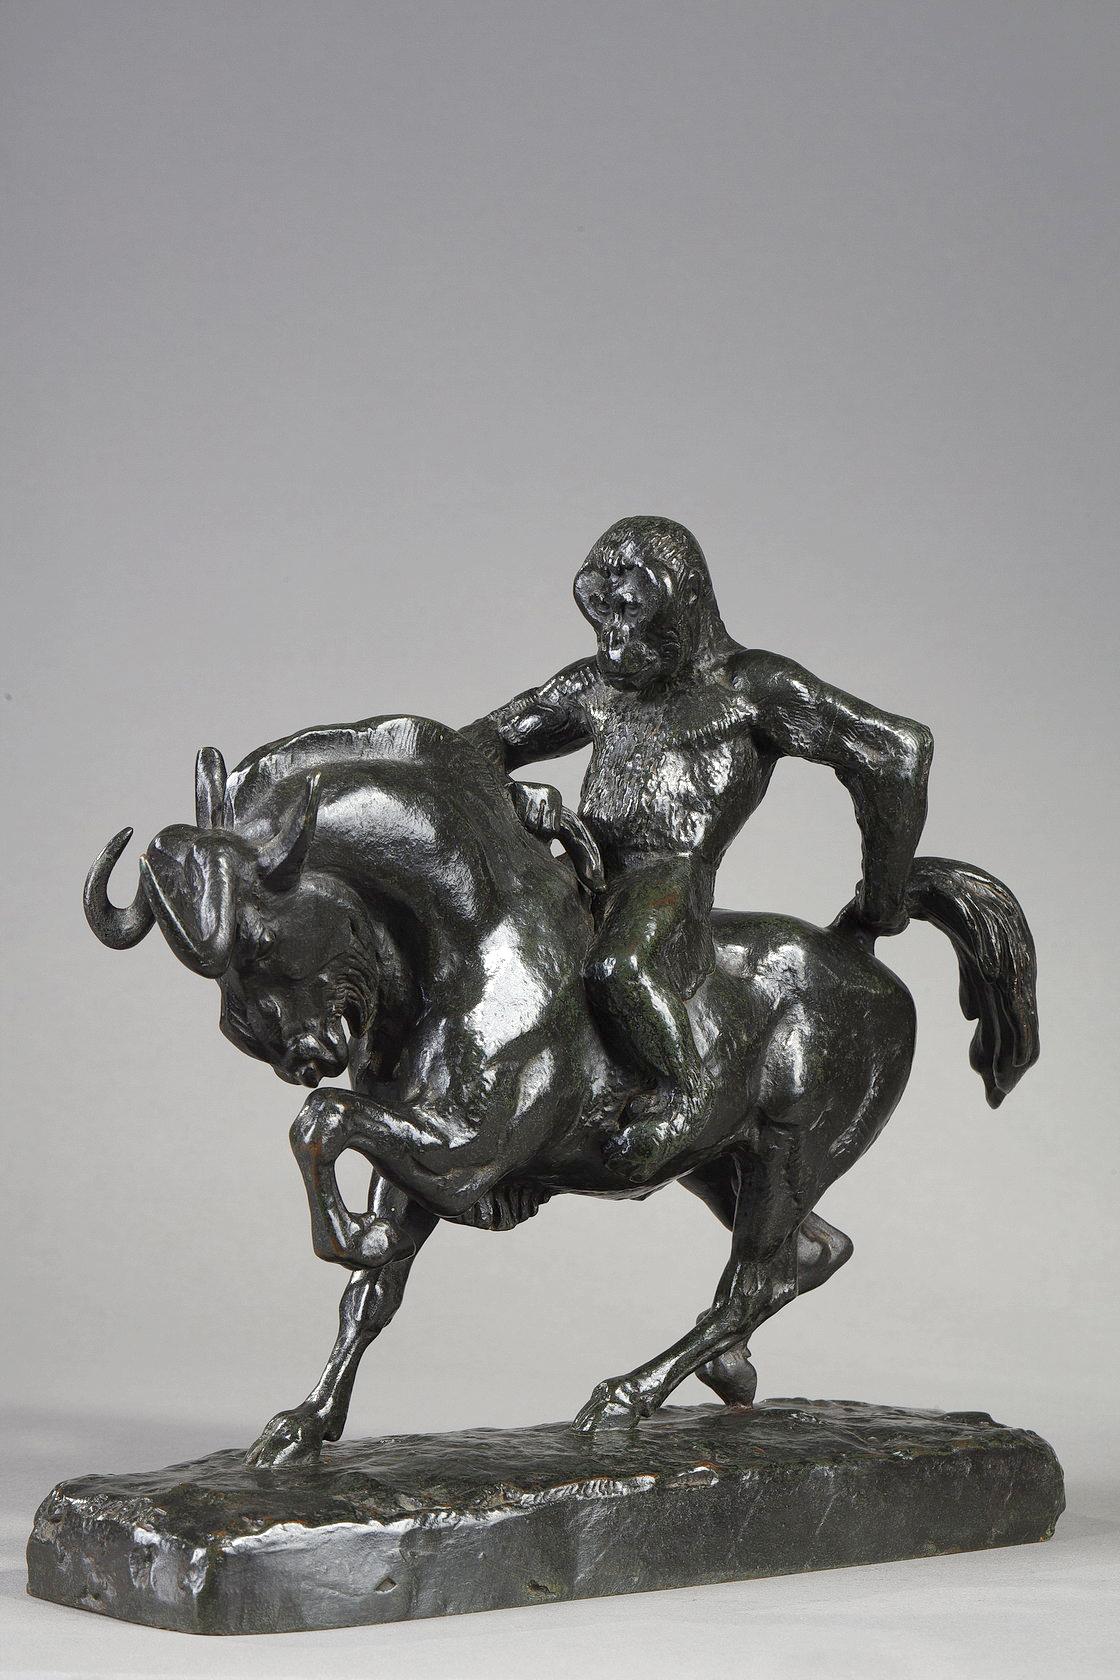 Ape riding on a Gnu
by Antoine-Louis BARYE (1796-1875)

A bronze group with a nuanced dark green patina
signed 